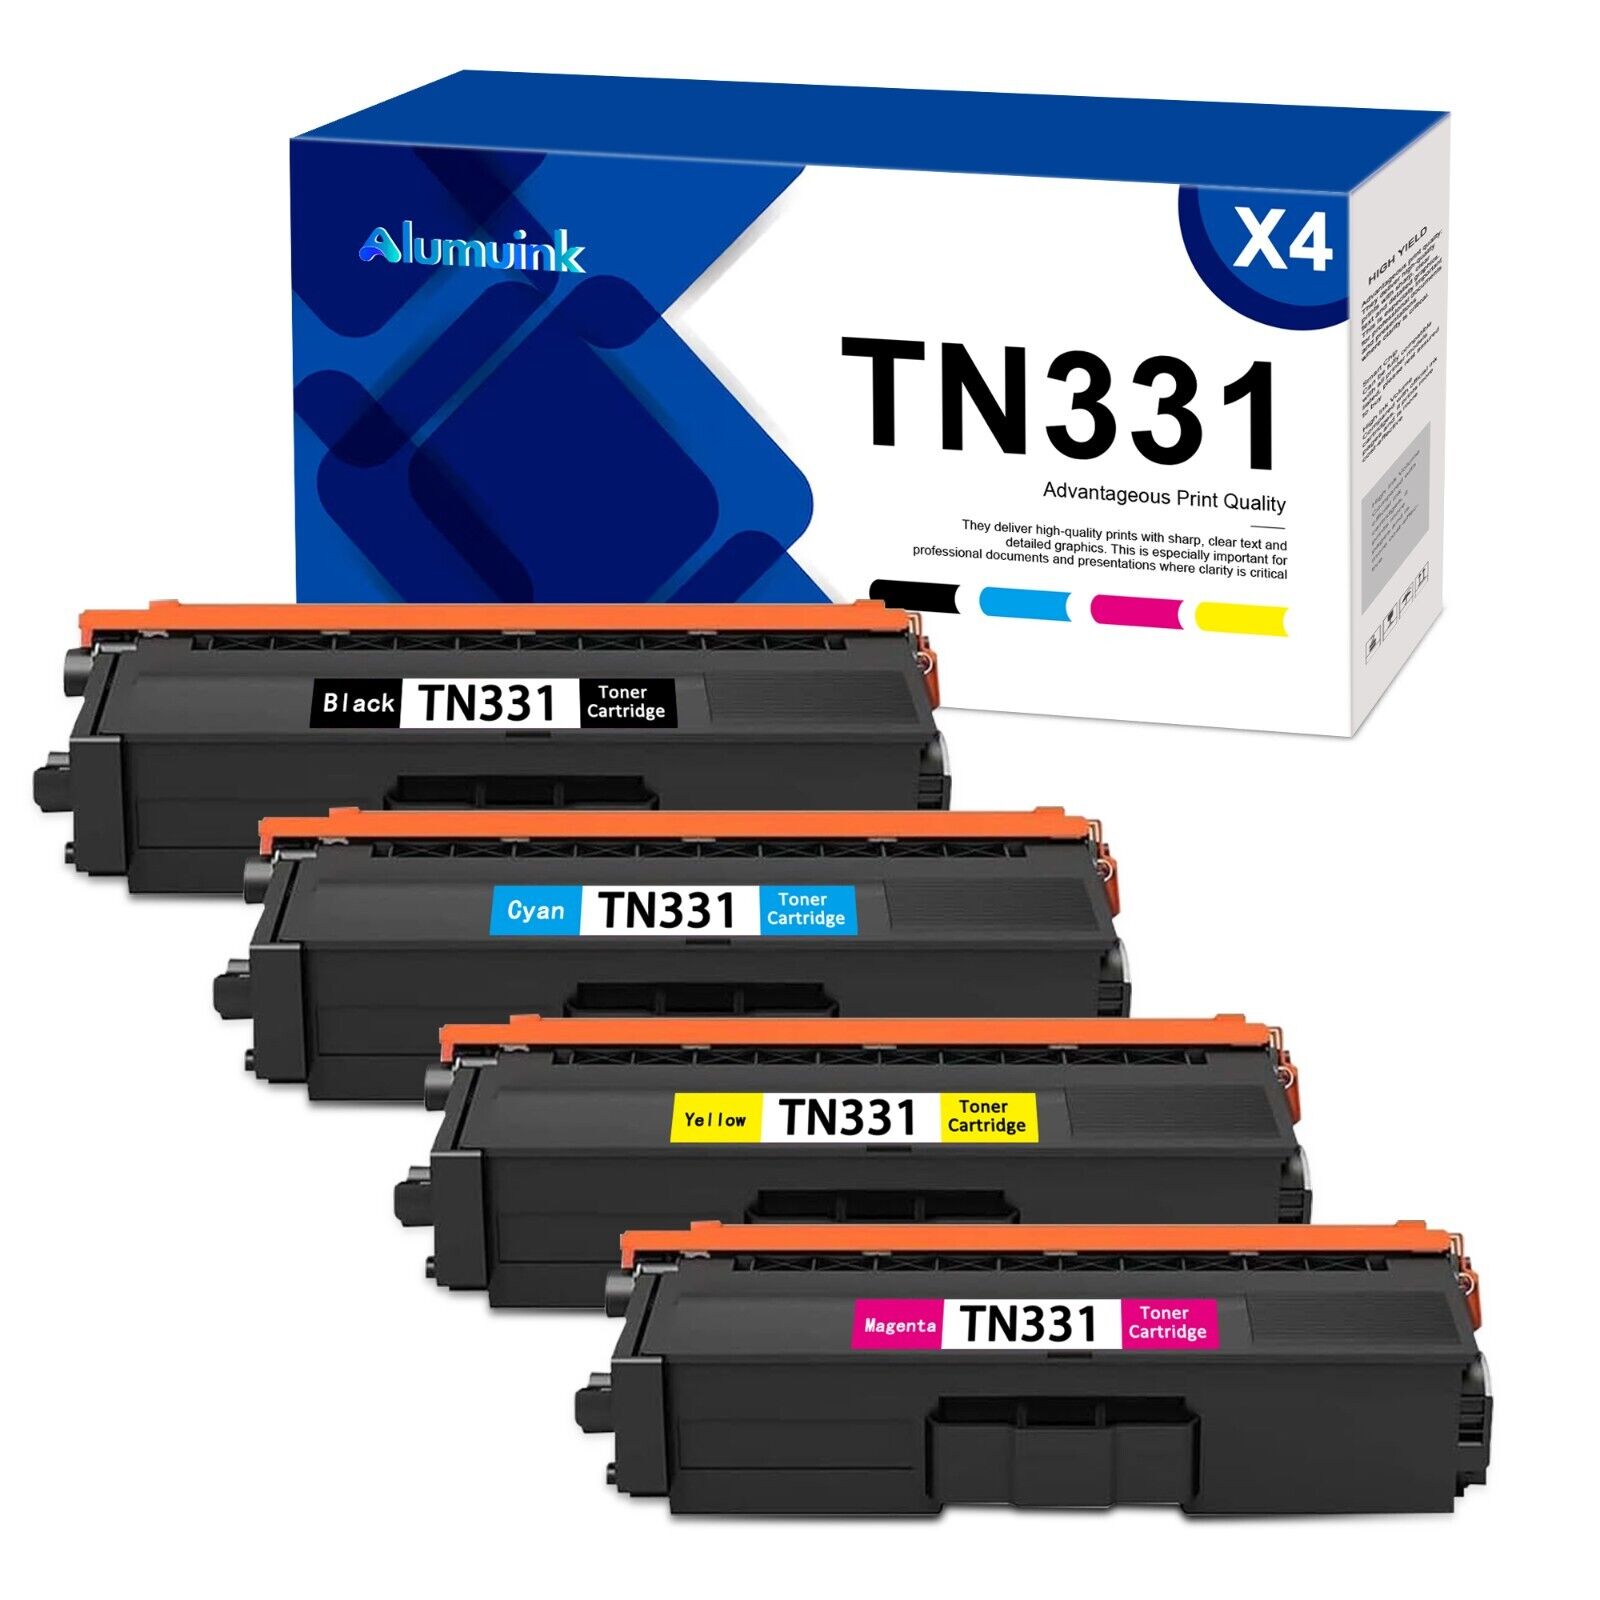 High Yield TN331 Toner Replacement for Brother HL-L8250CDN (1BK/C/M/Y, 4 Pack)